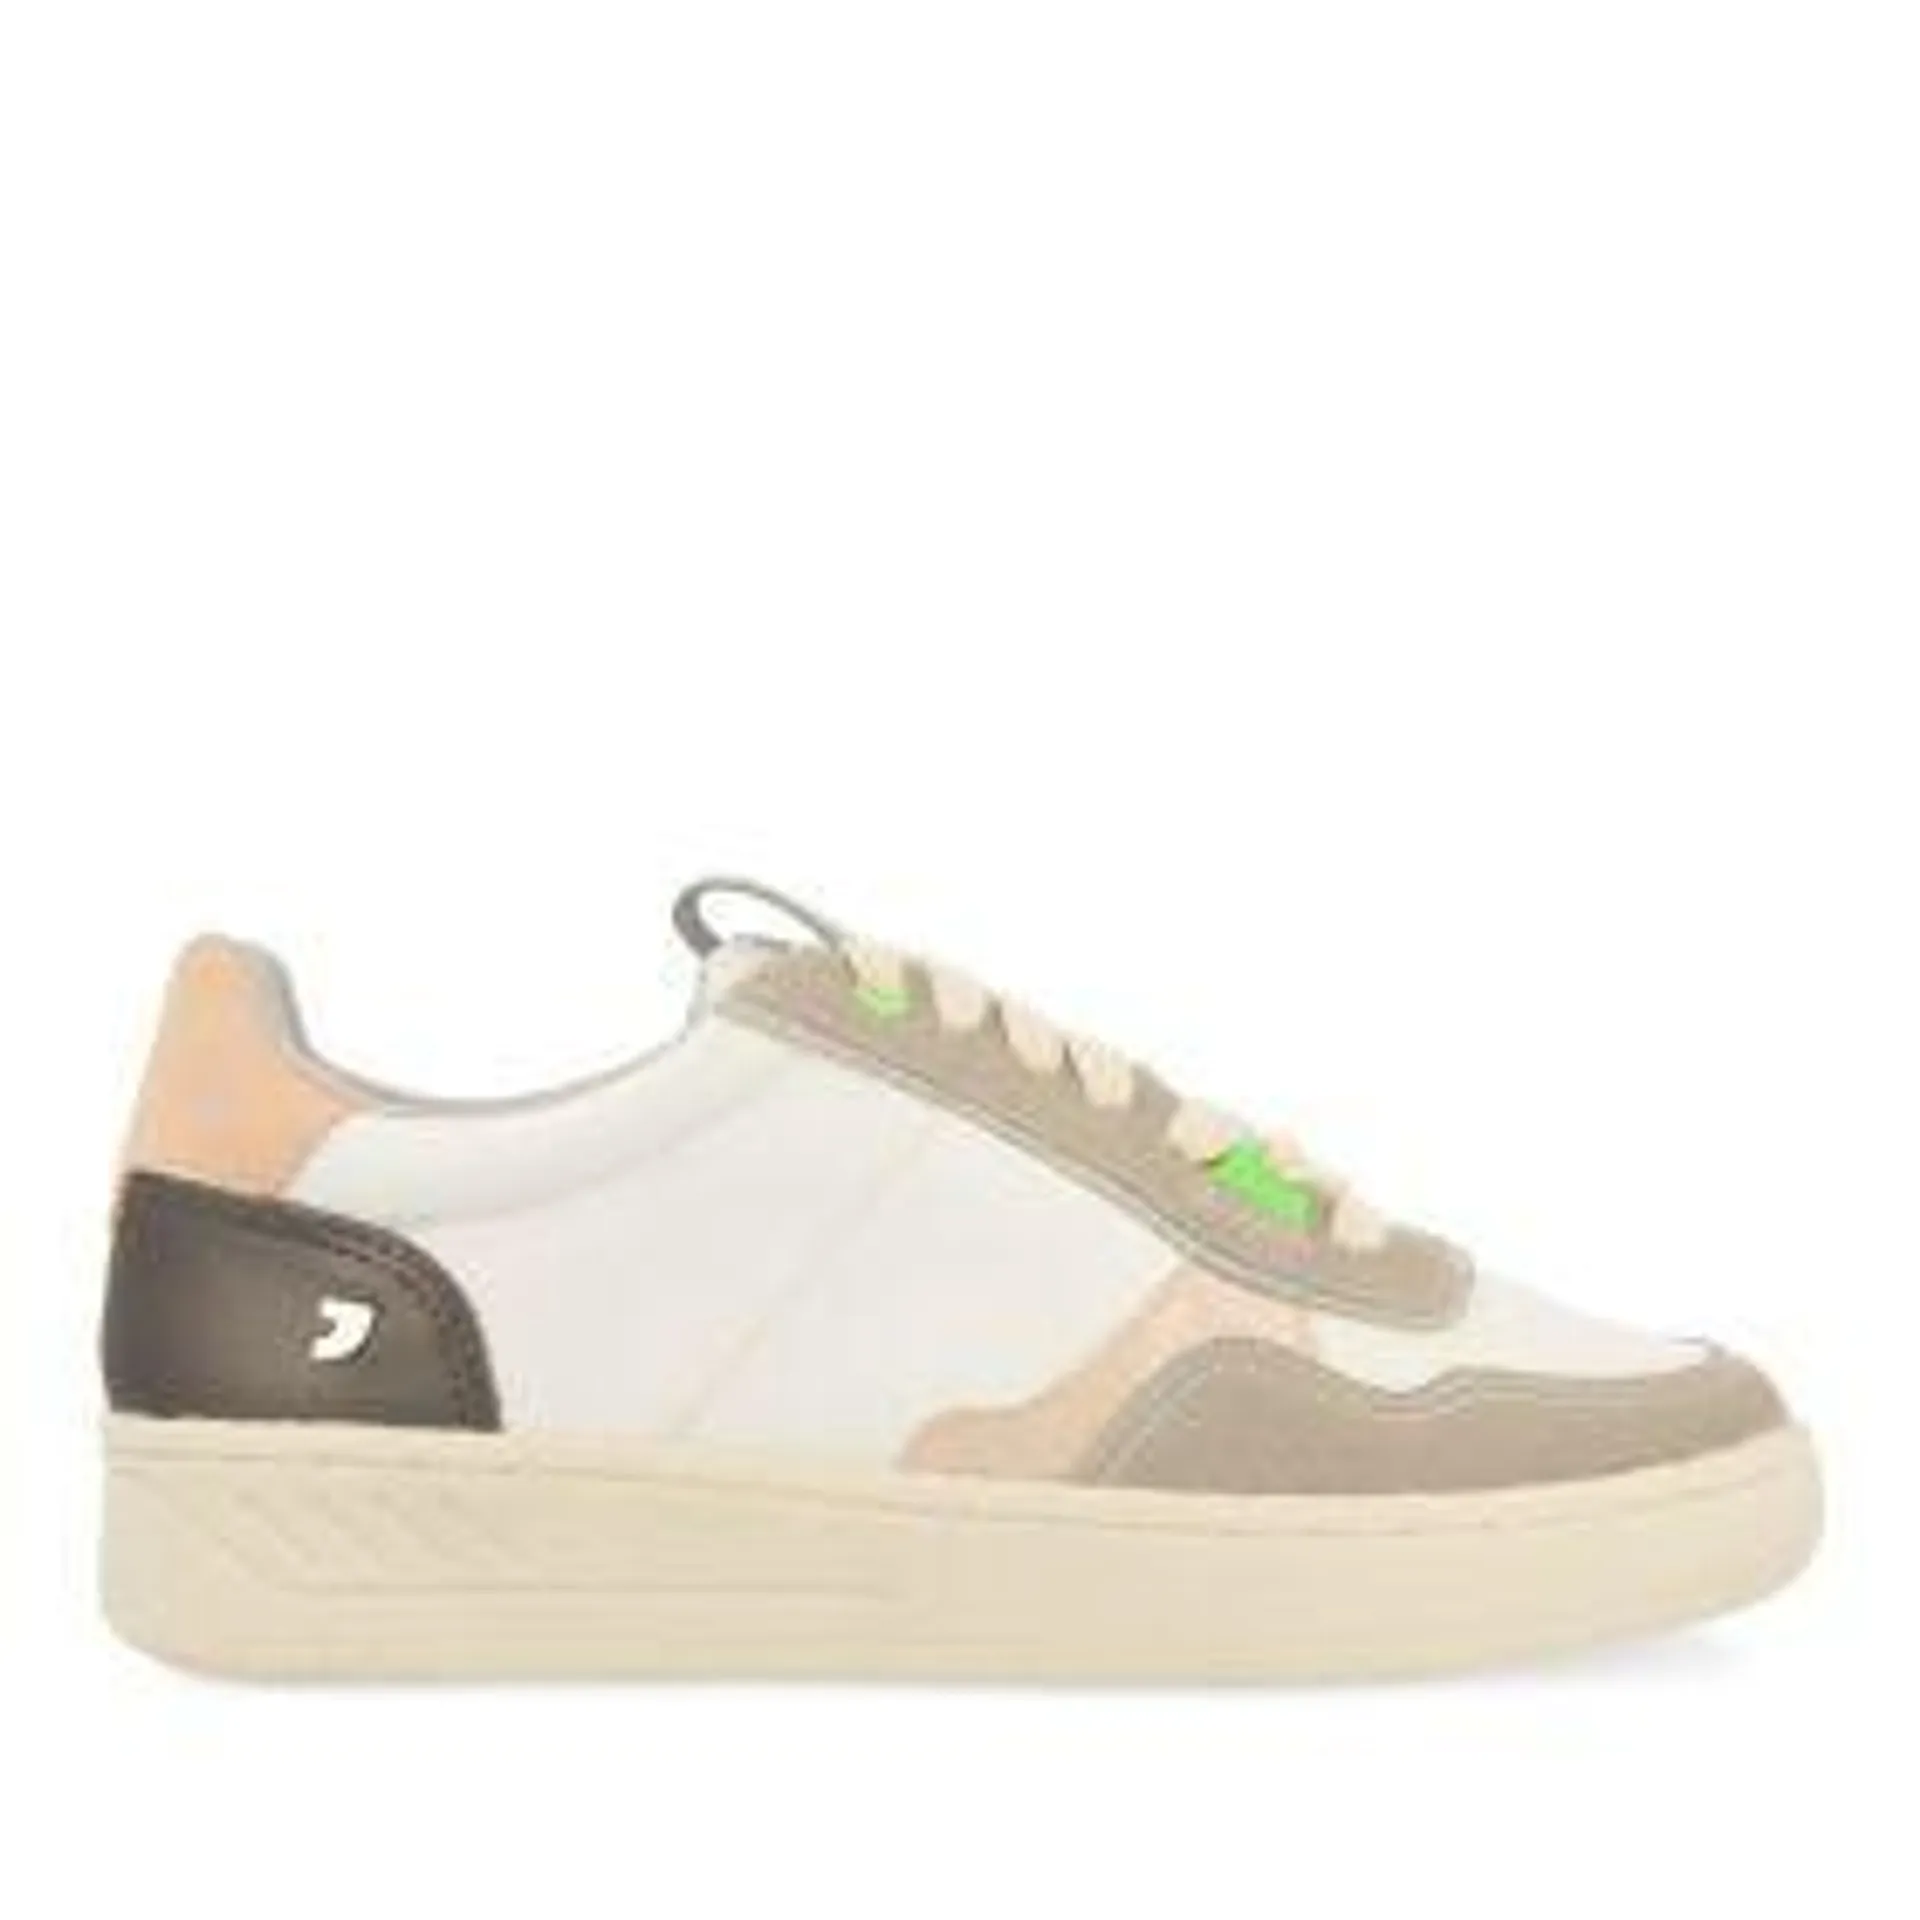 Keorich women's off-white sneakers with pastel shades and neon details